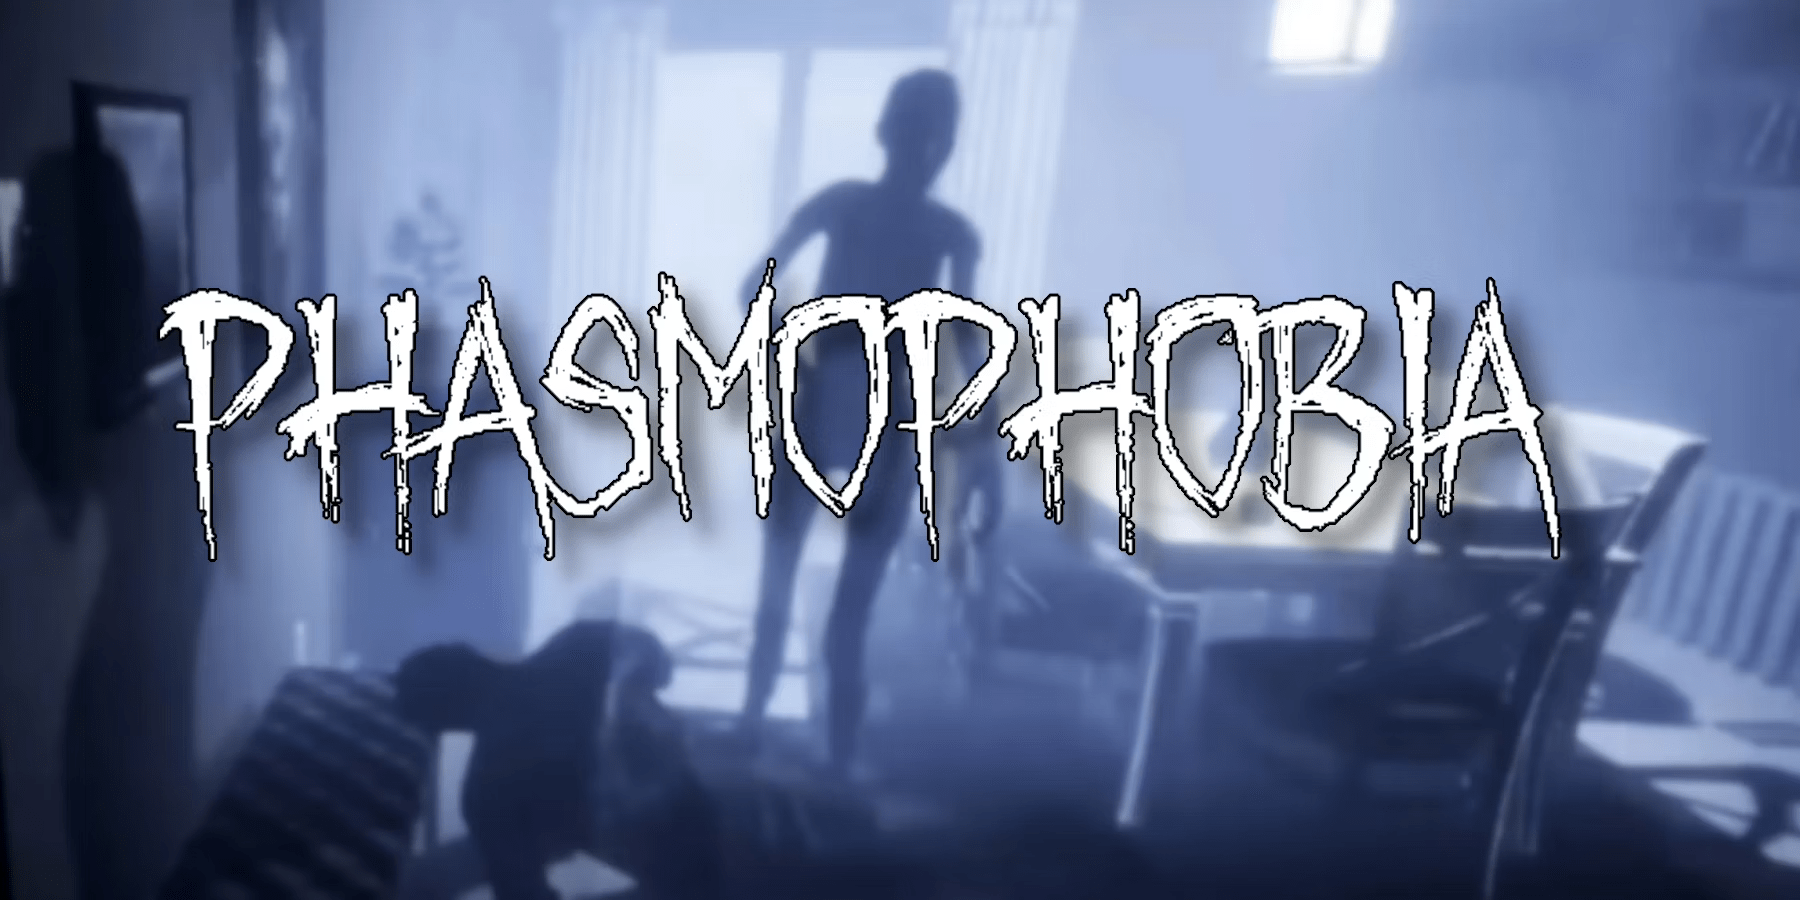 Phasmophobia Console Release